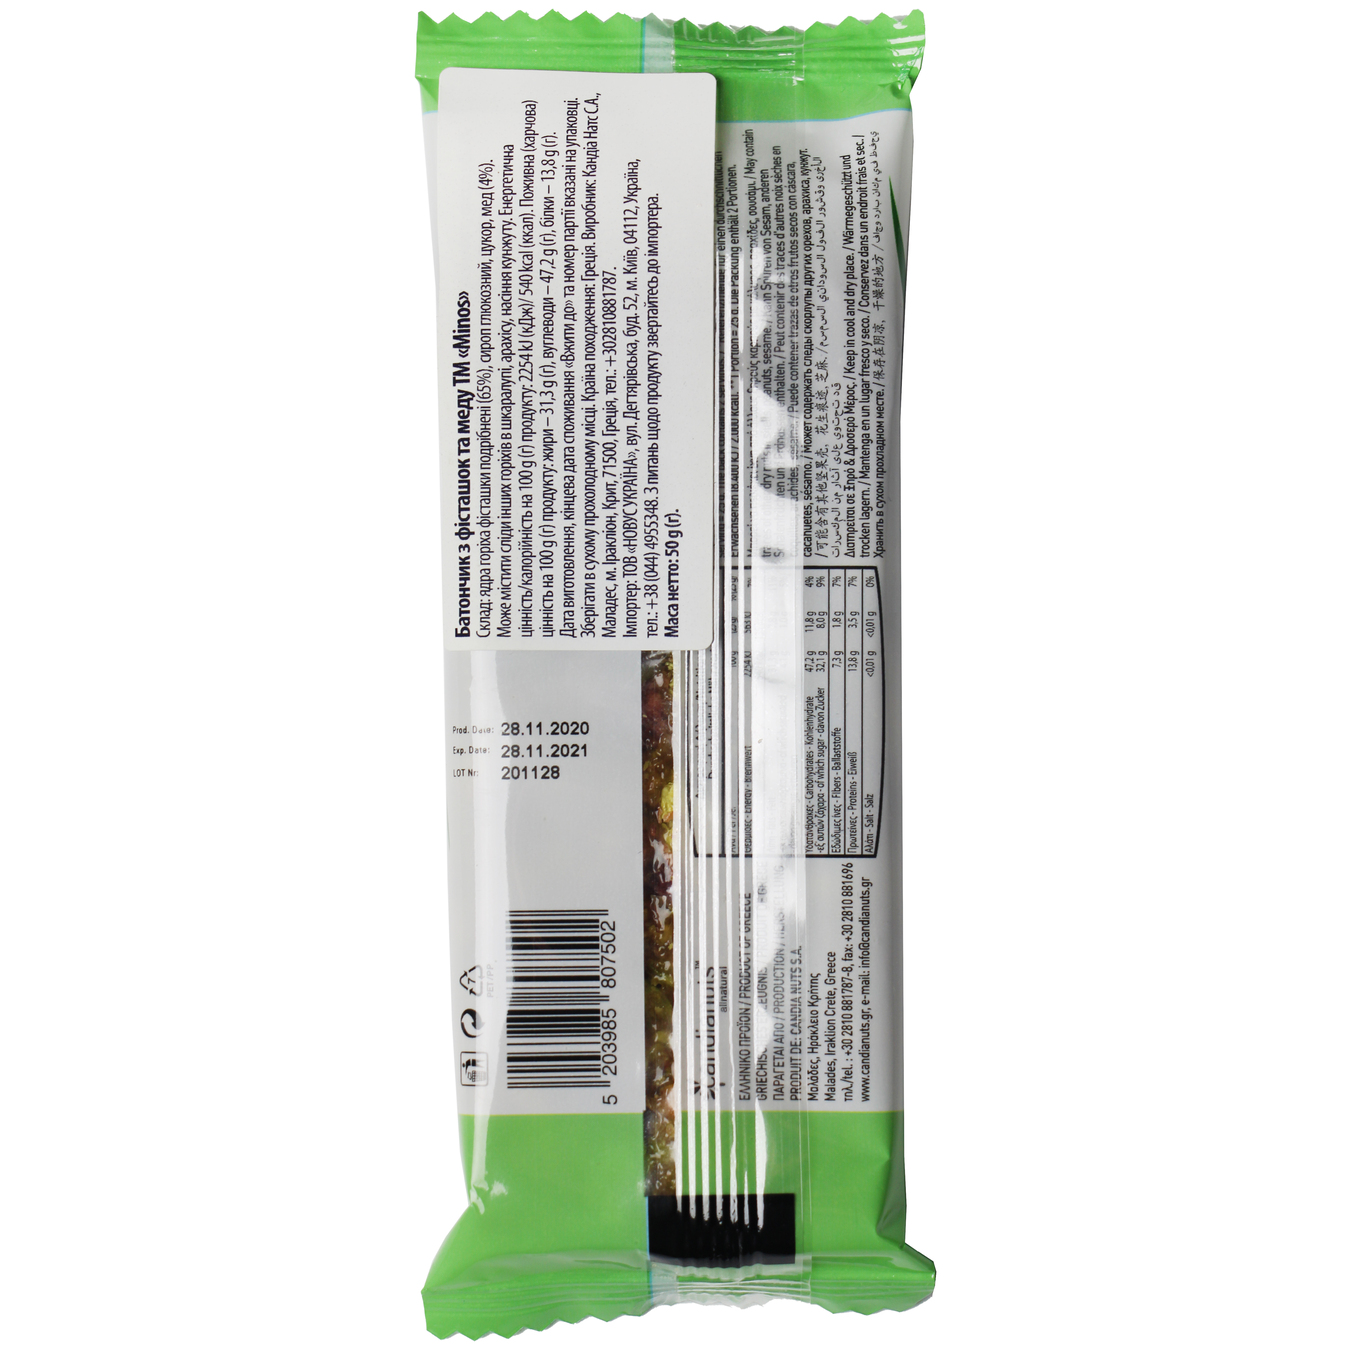 Minos With Pistachio And Honey Nut Bar 50g 2